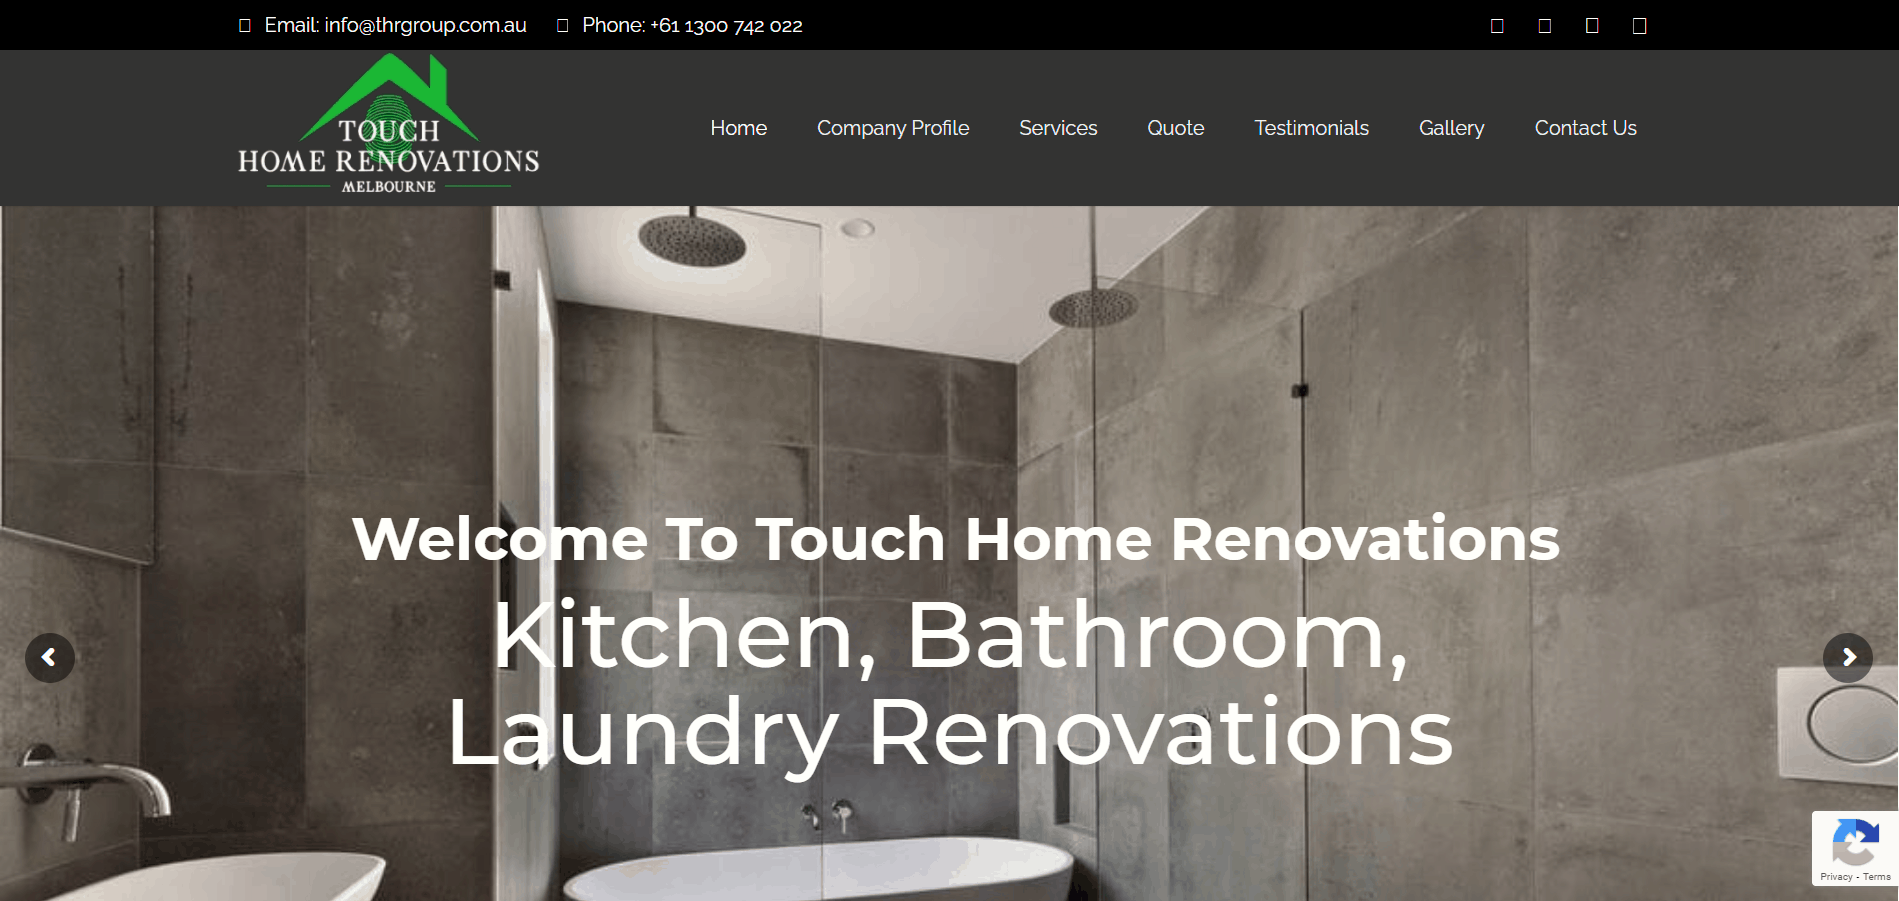 Touch Home Renovations Melbourne